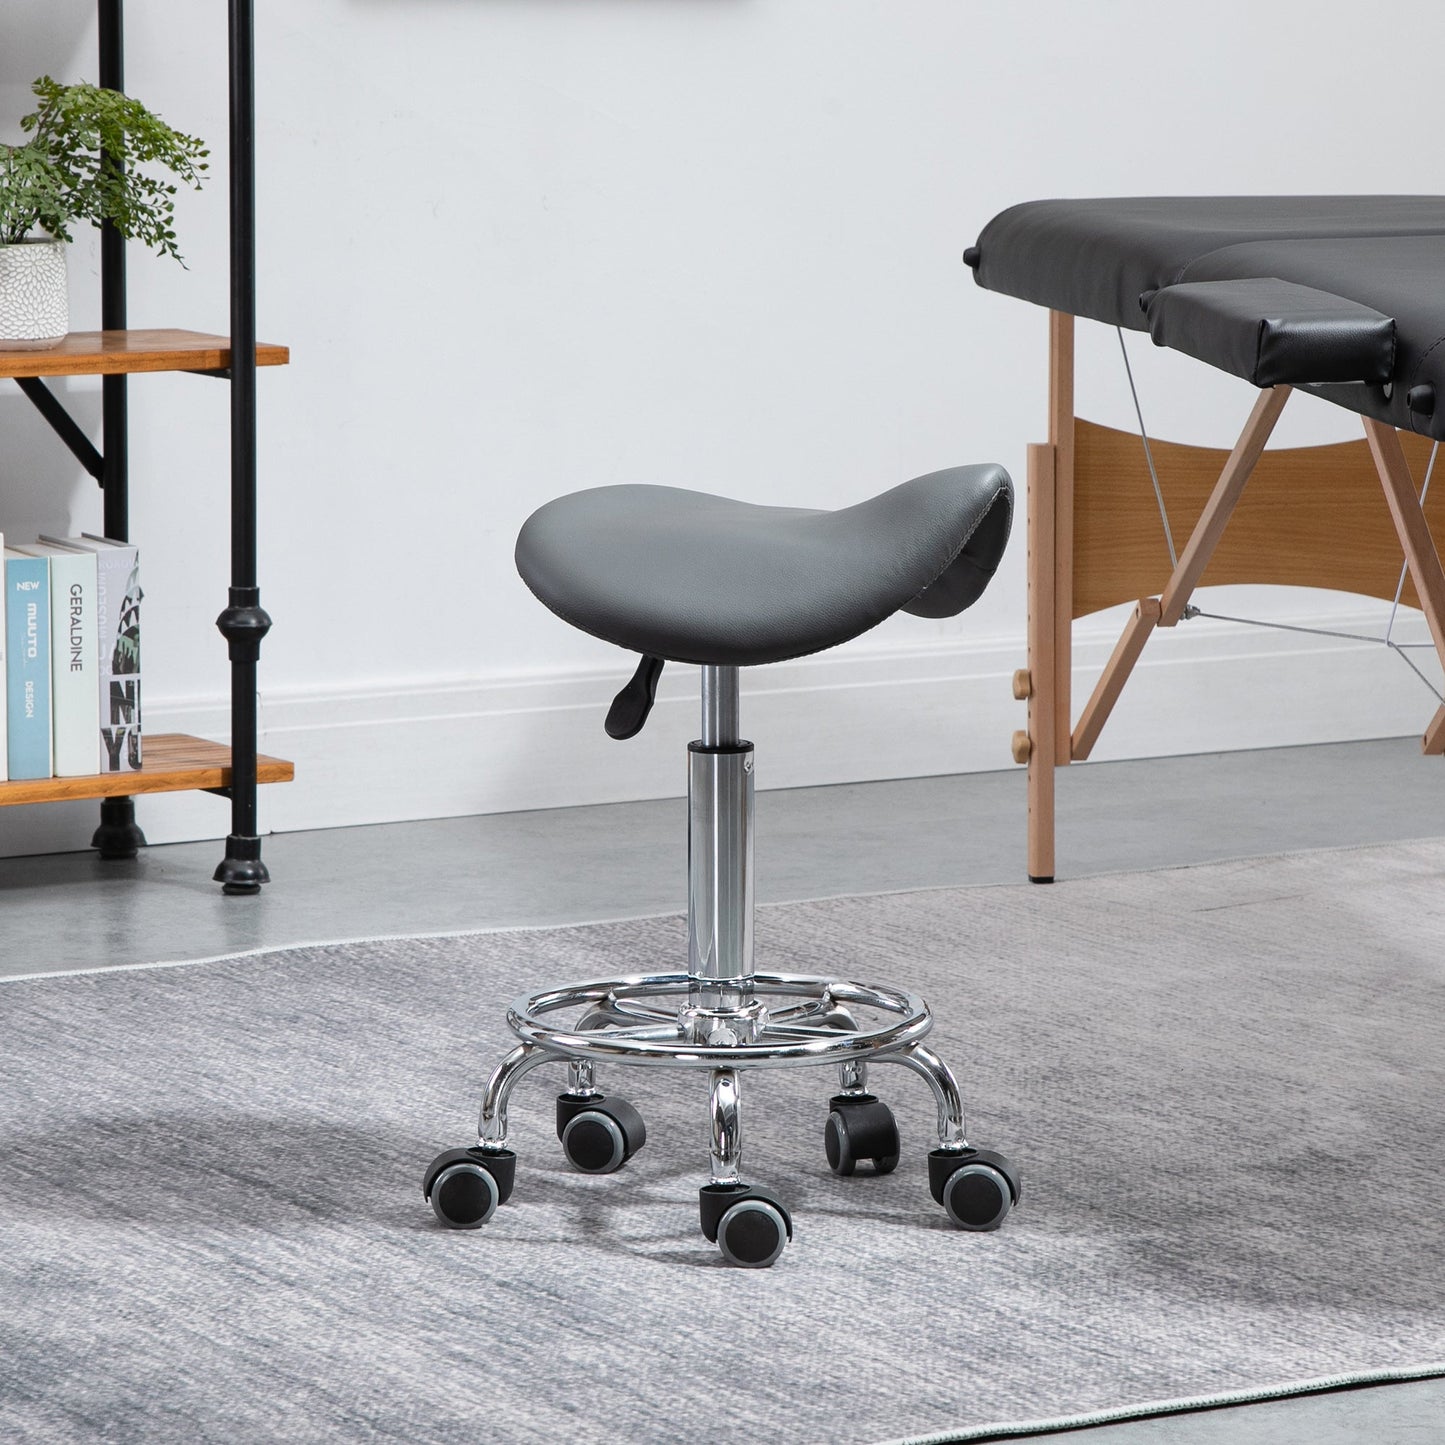 Saddle Stool, PU Leather Adjustable Rolling Salon Chair for Massage, Spa, Clinic, Beauty and Tattoo, Grey at Gallery Canada